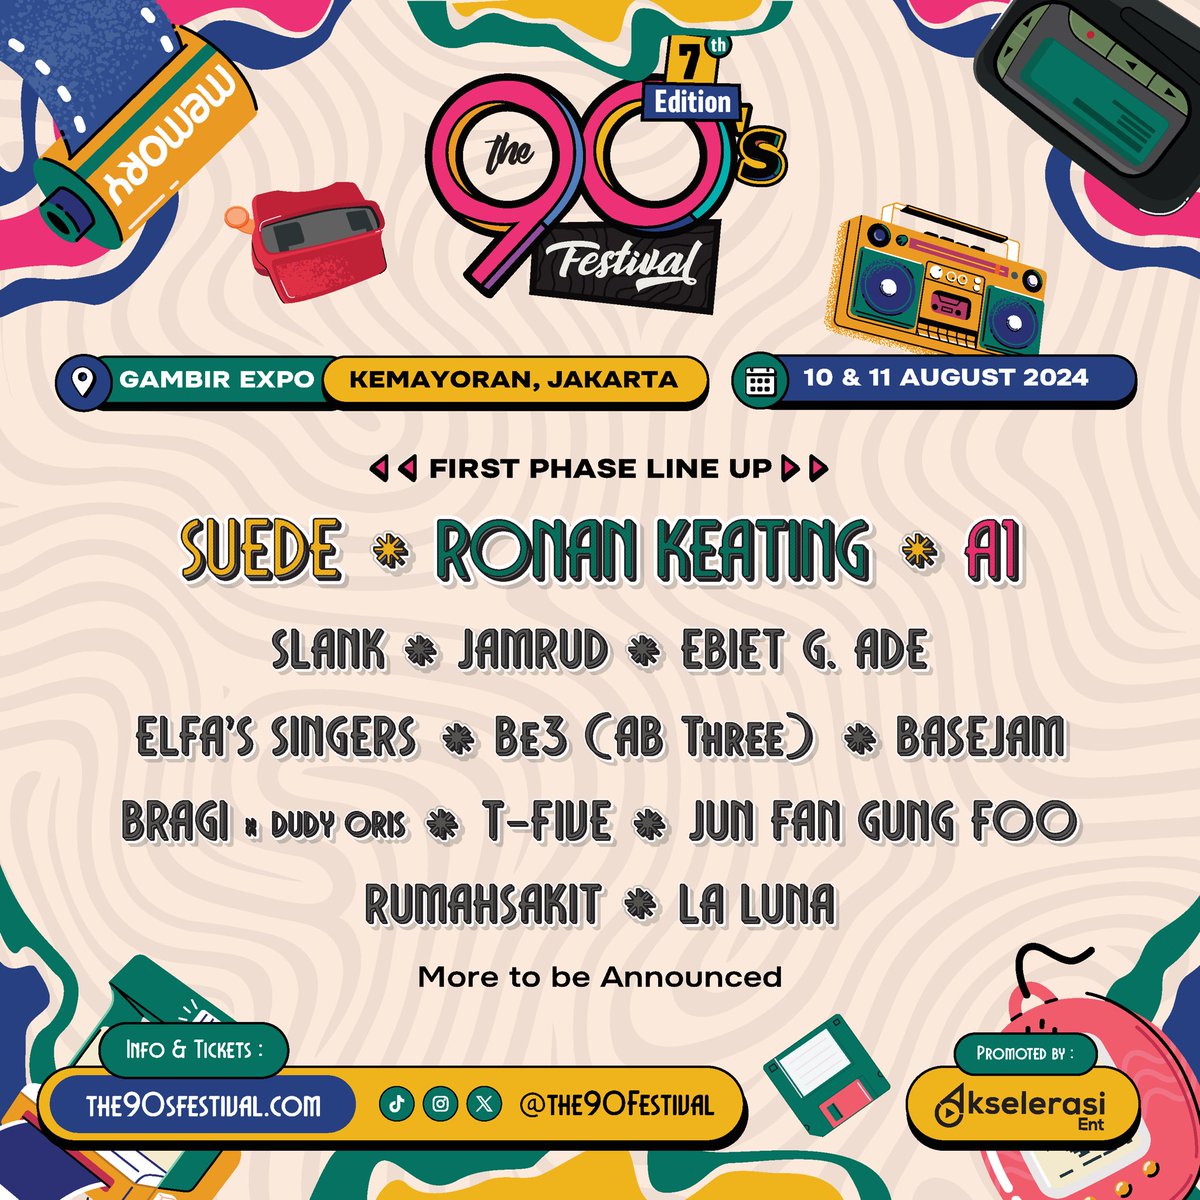 Suede will be performing at @the90sfestival in Jakarta this August. Tickets are now on sale at ticket.the90sfestival.com - SuedeHQ